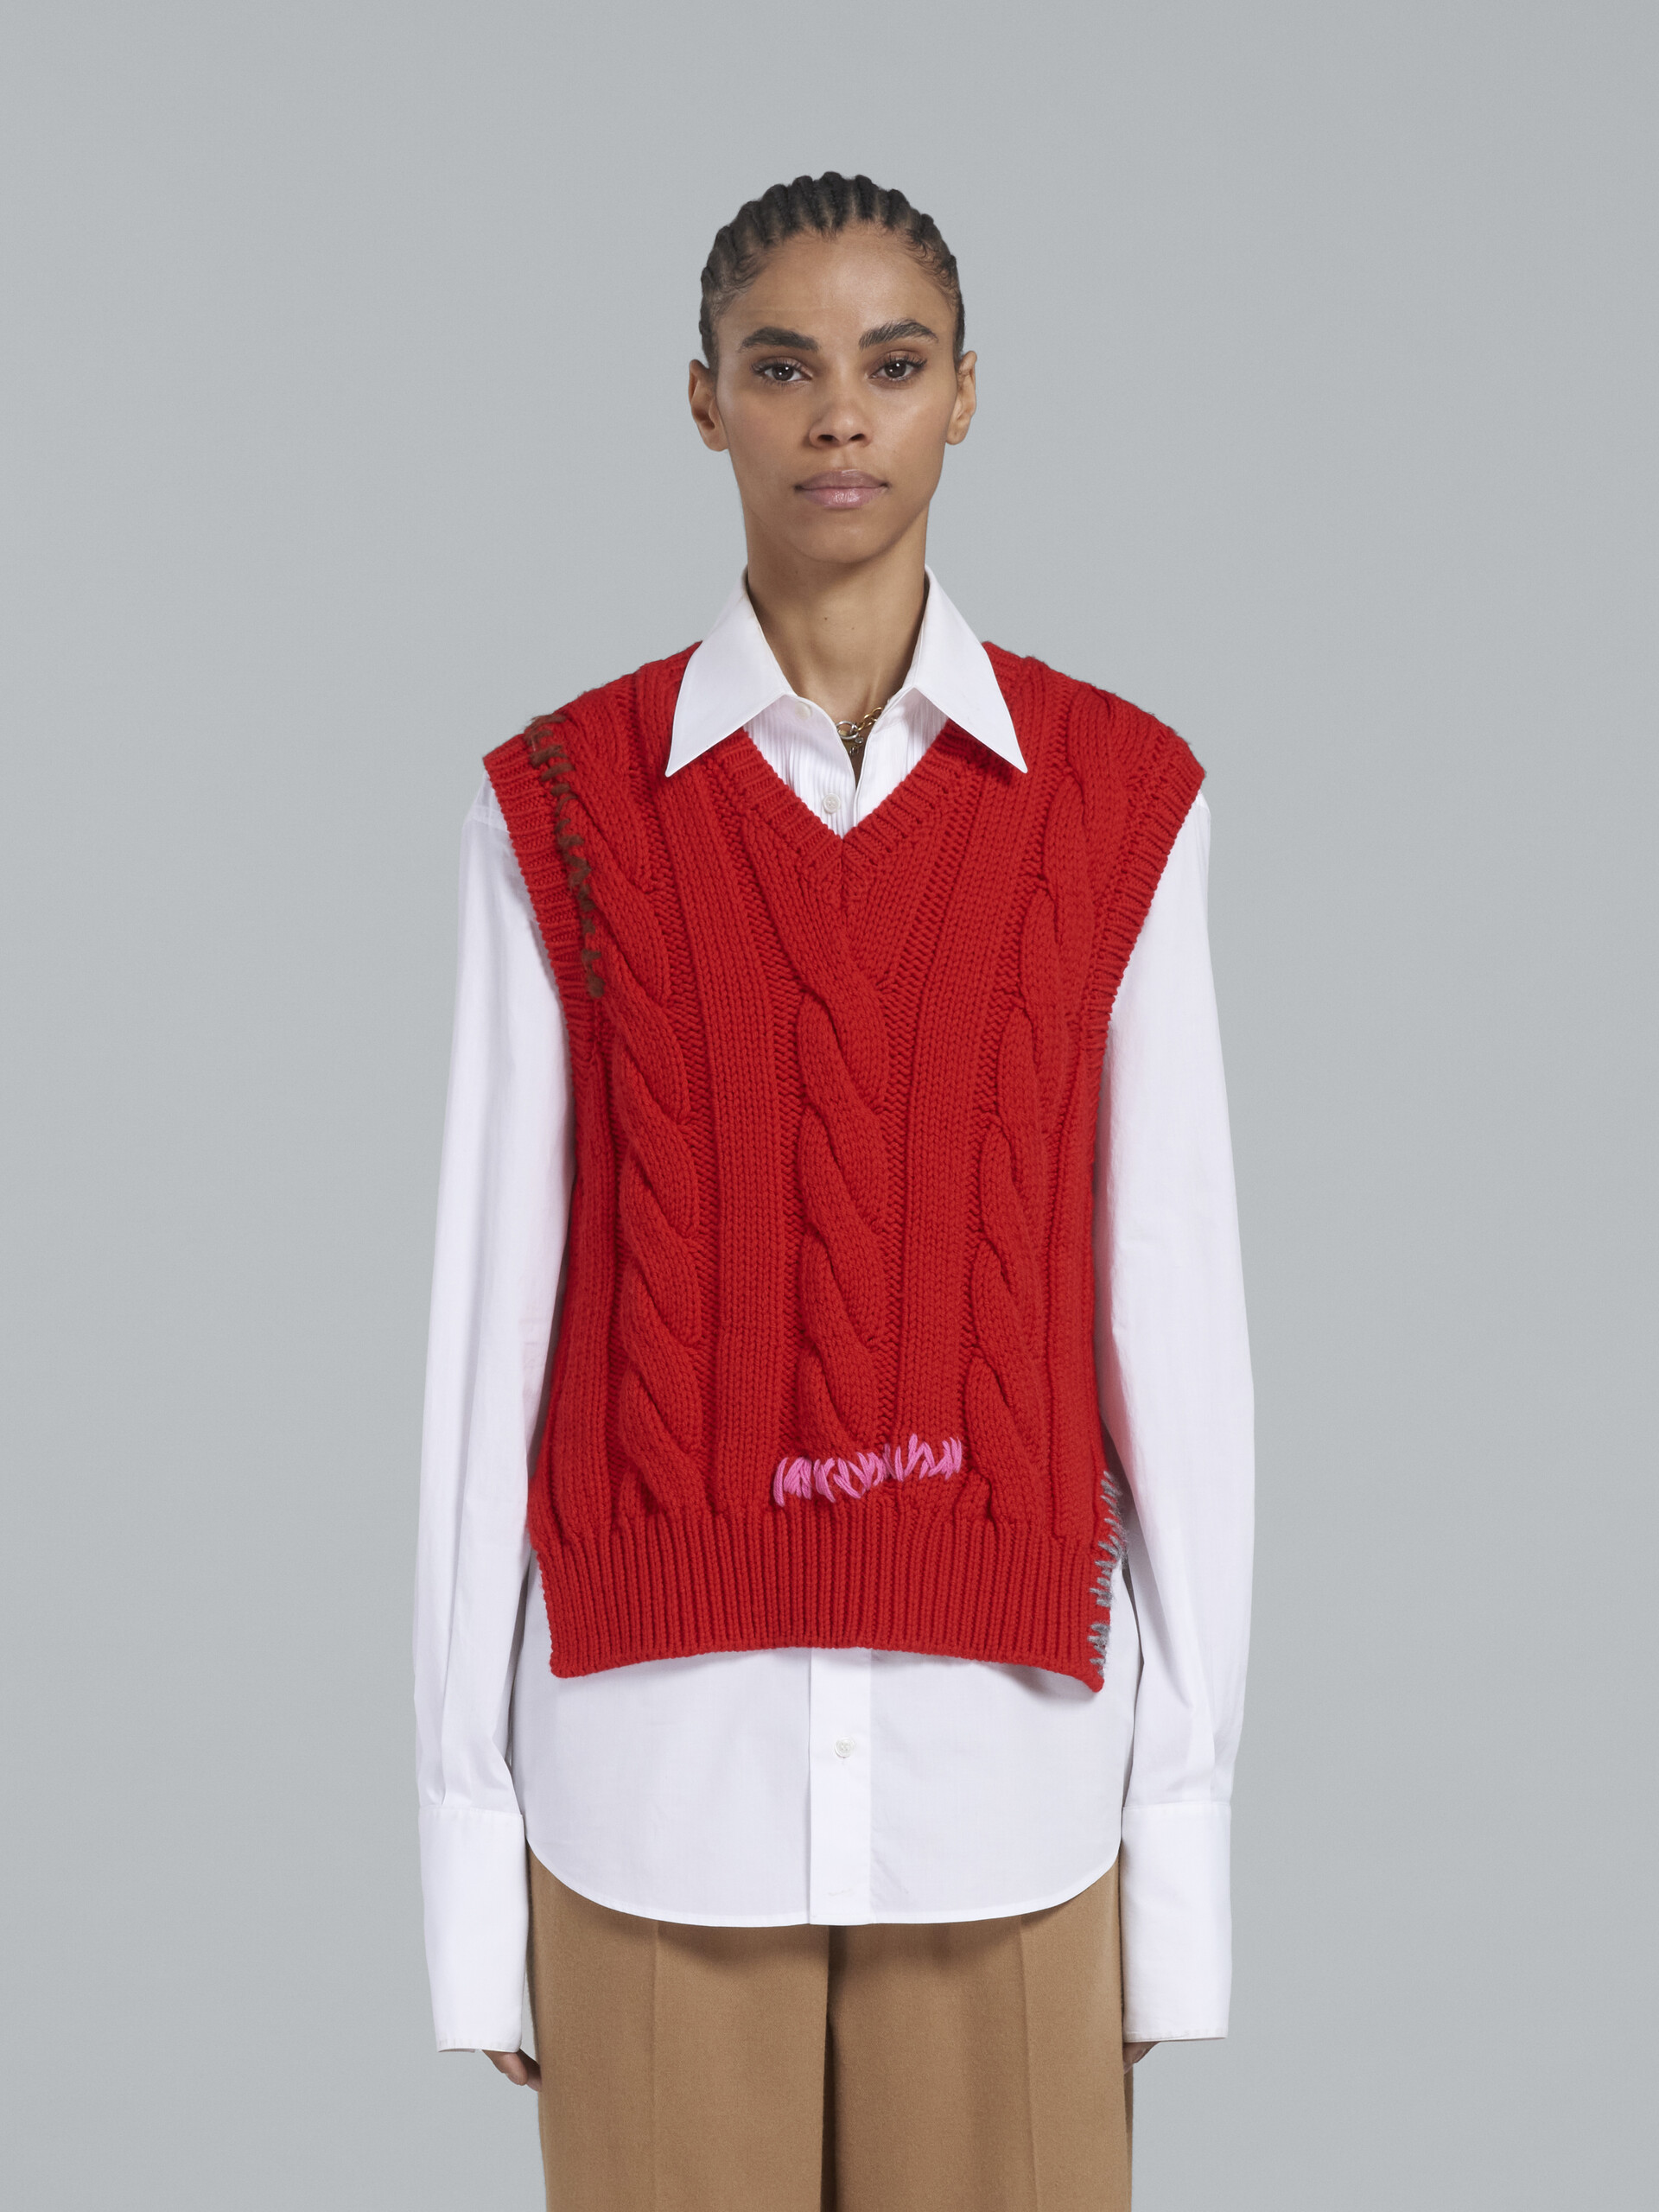 Red cable-knit vest - Pullovers - Image 2